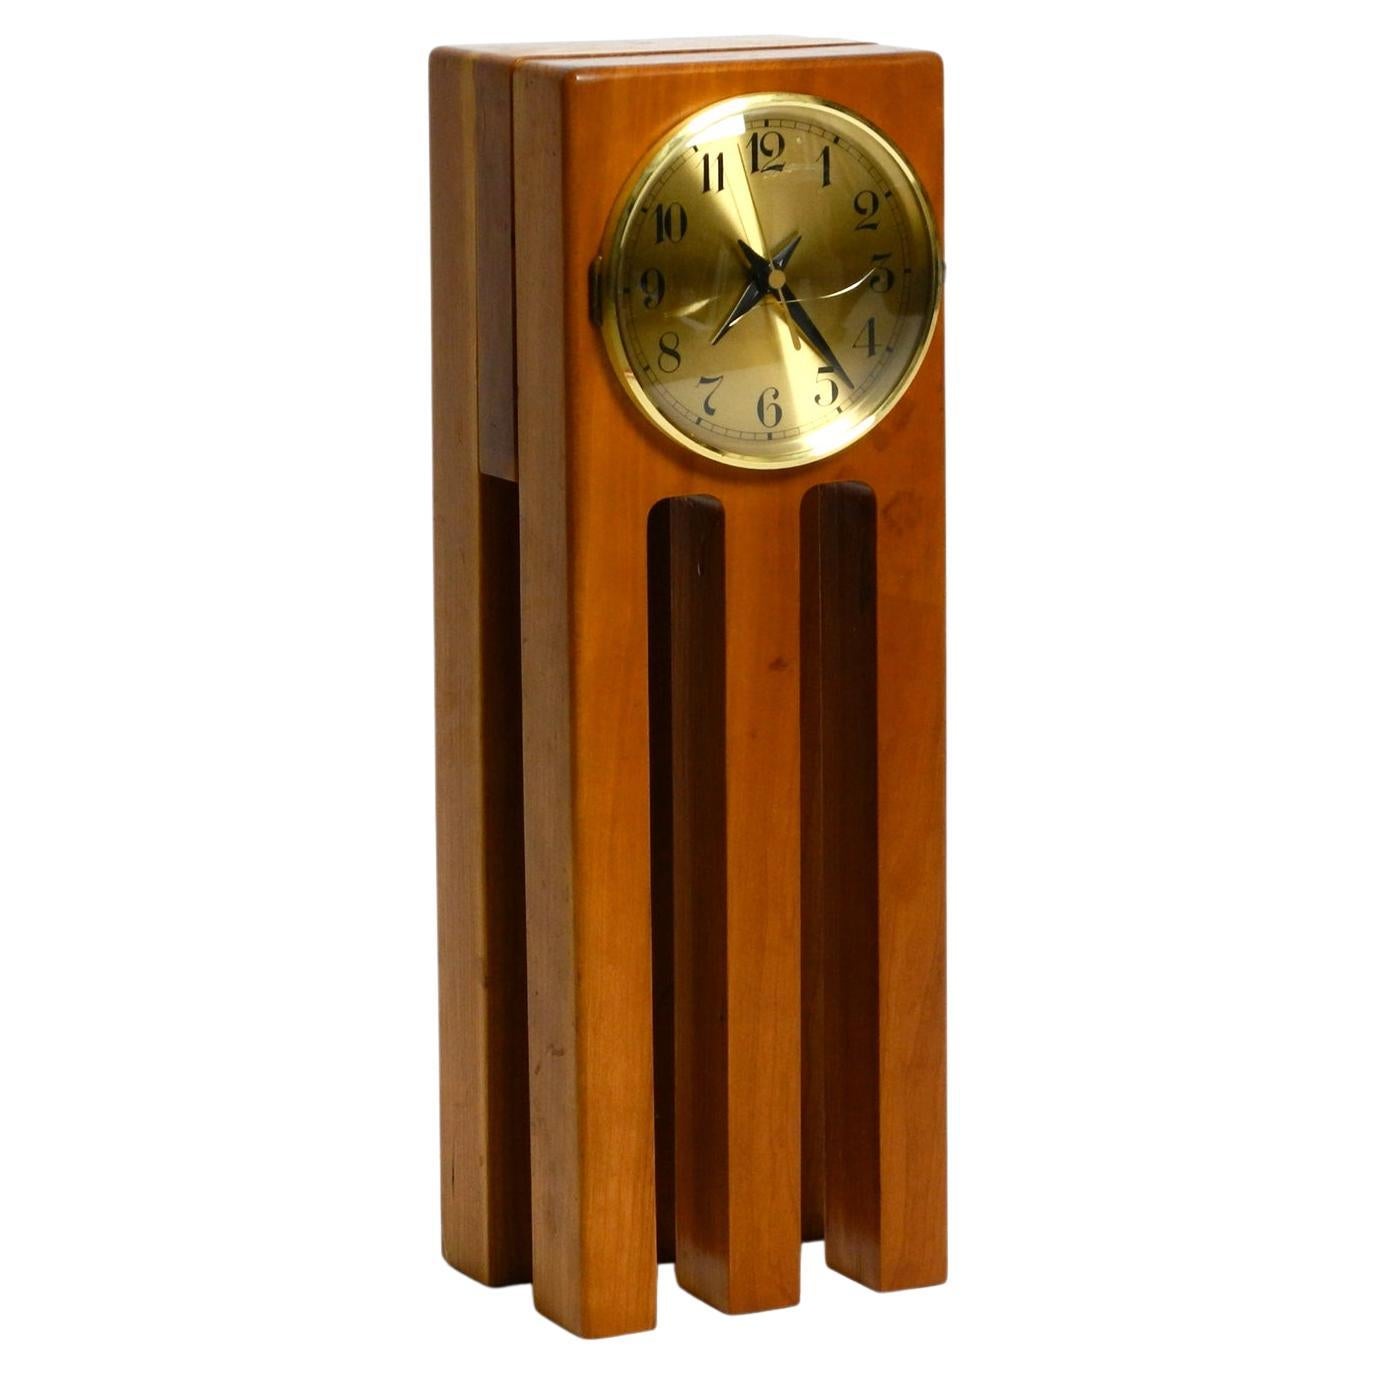 Large, Unusual 1980s Postmodern Design Table Clock Made of Cherry Wood